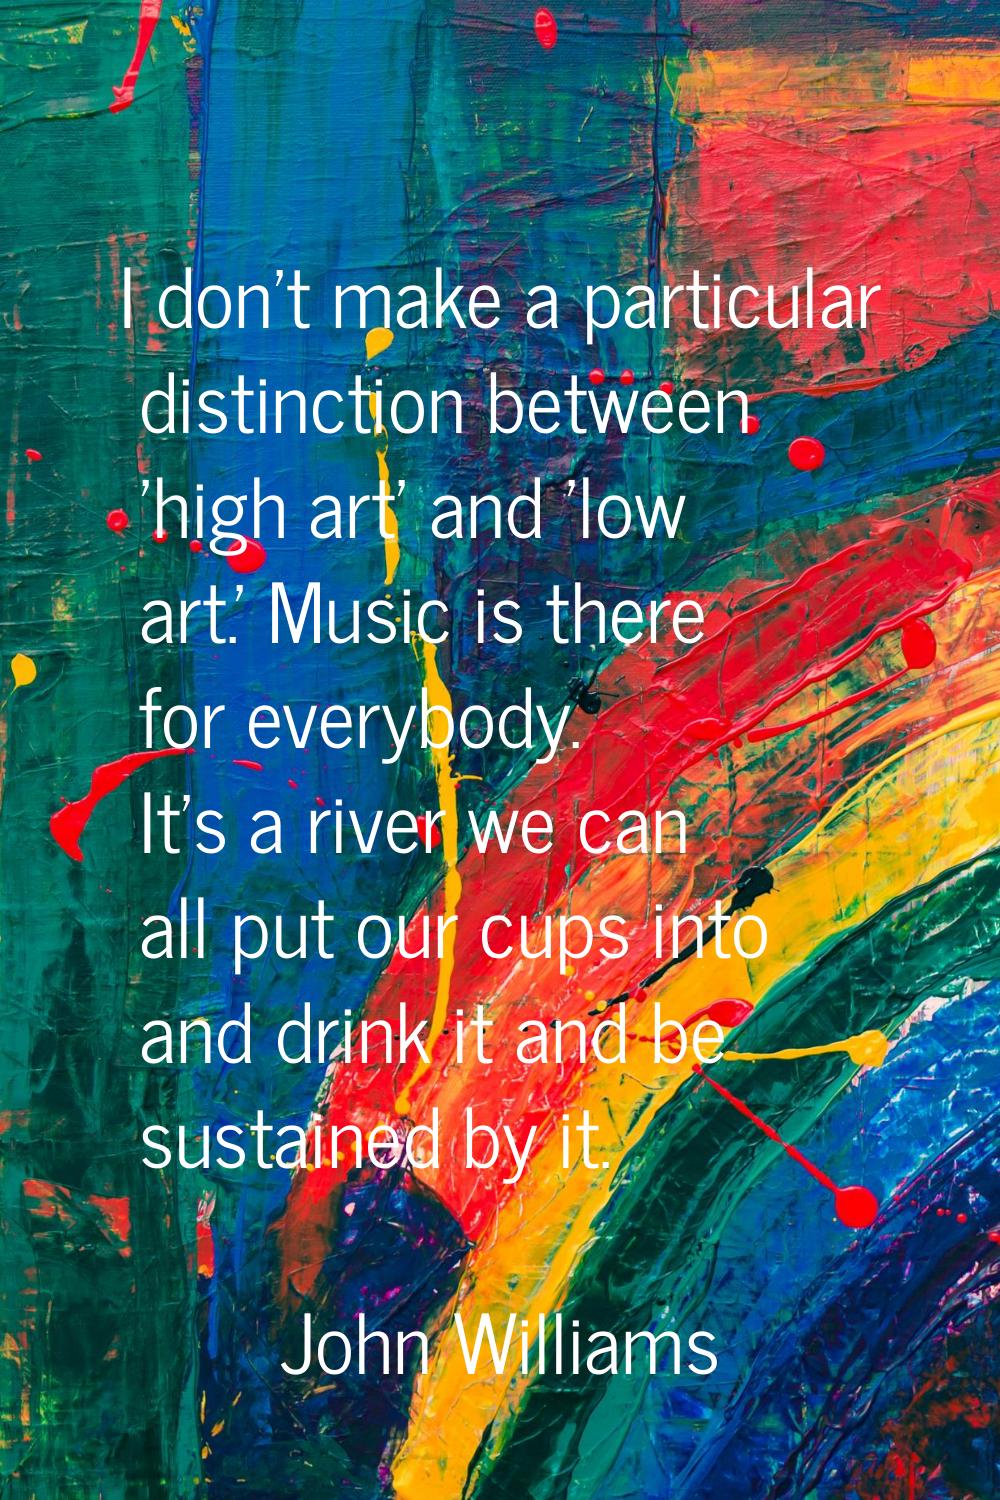 I don't make a particular distinction between 'high art' and 'low art.' Music is there for everybod